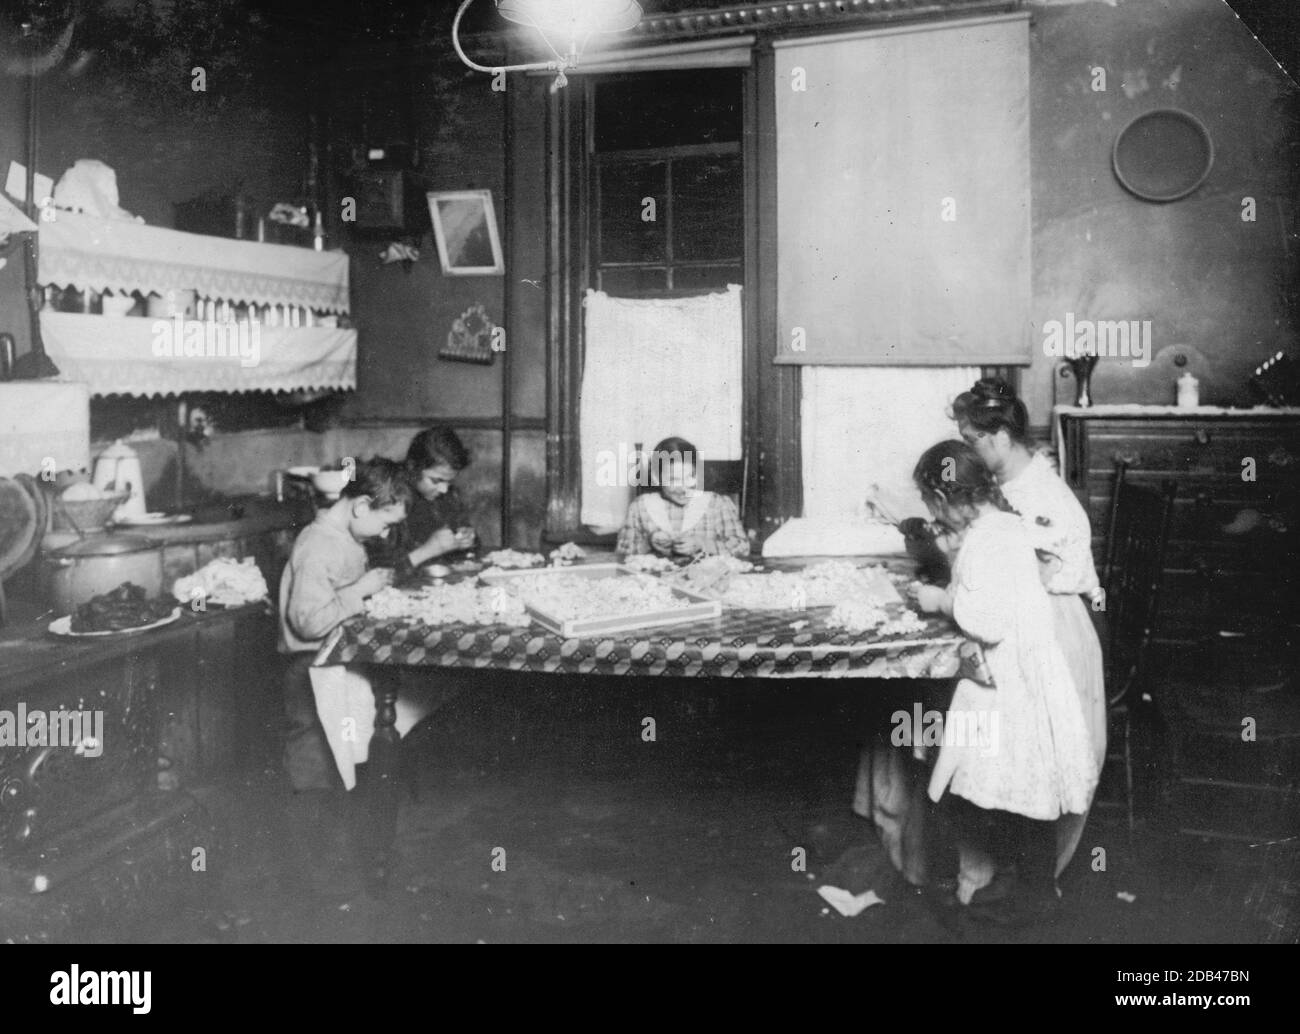 Night scene. 7:30 P.M. January 29, 1912. Making violets, and they often work later. Pollinni family, 5 Carmine St., N.Y. living in a rear [i.e., rear.] tenement. The six year old helps some. The eight, ten, and twelve year olds work later than this at times. Brothers, 15 and 17 years old, work in factory.. Stock Photo